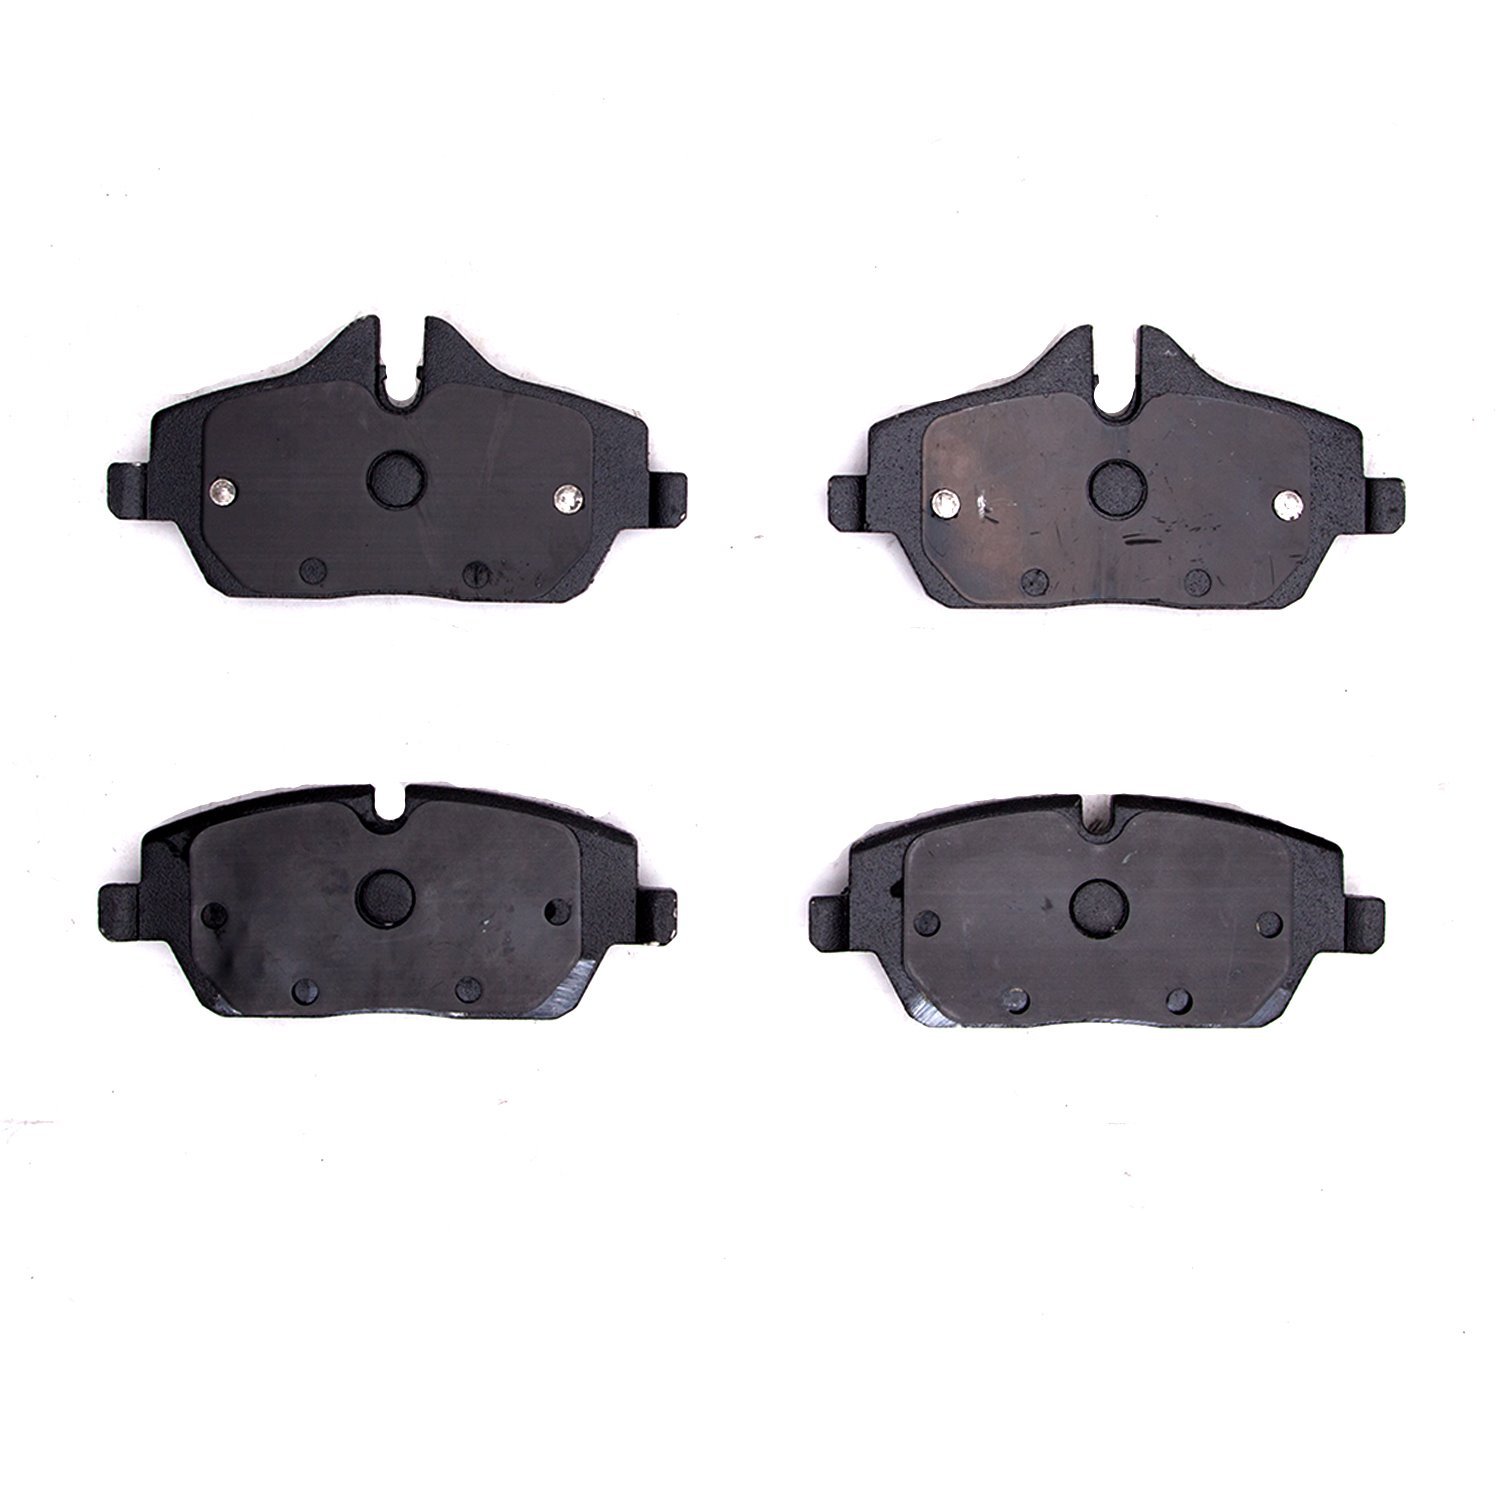 1310-1308-00 3000-Series Ceramic Brake Pads, Fits Select Multiple Makes/Models, Position: Front